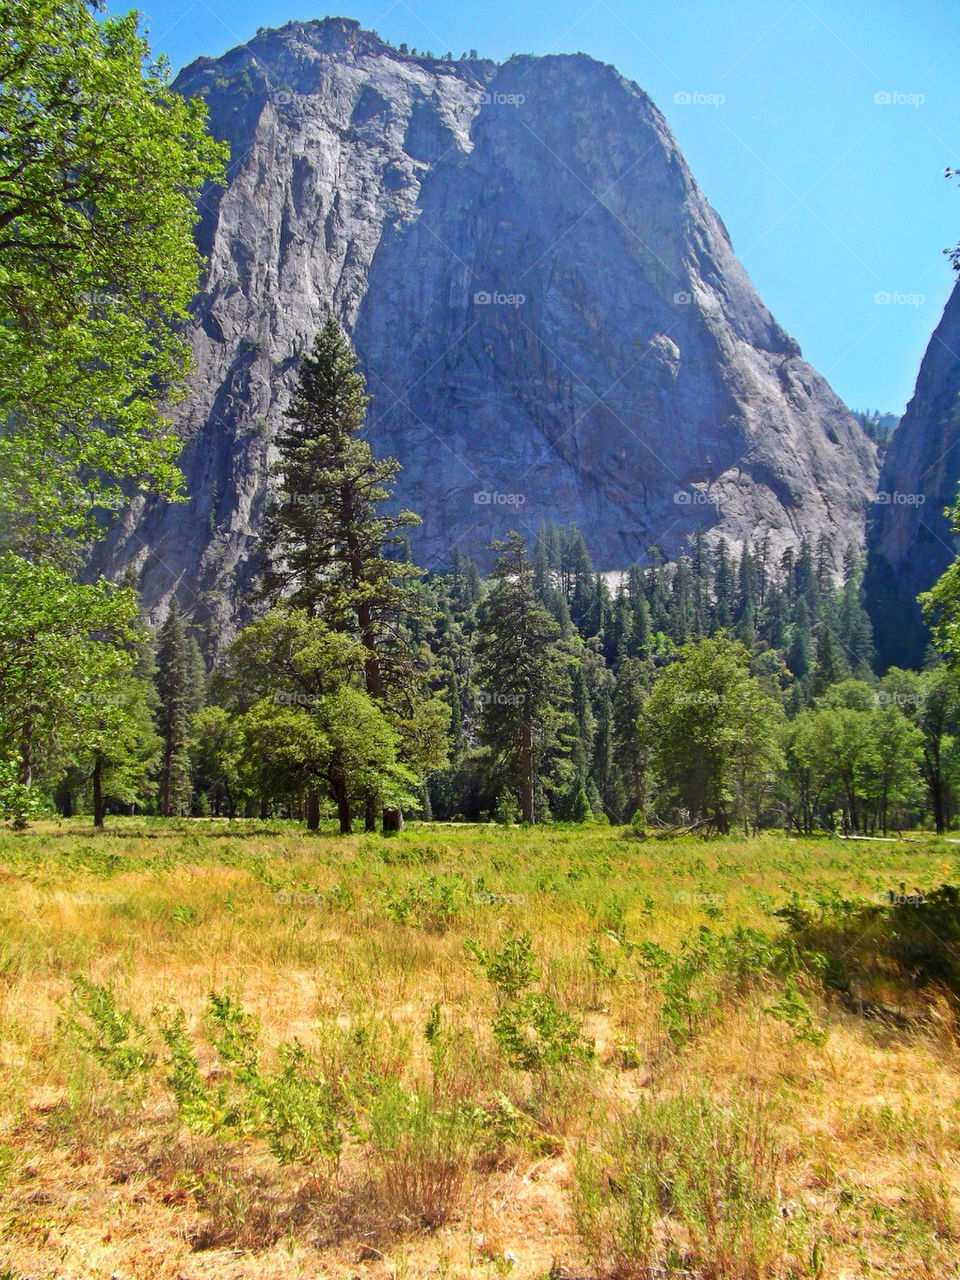 The beauty that is Yosemite